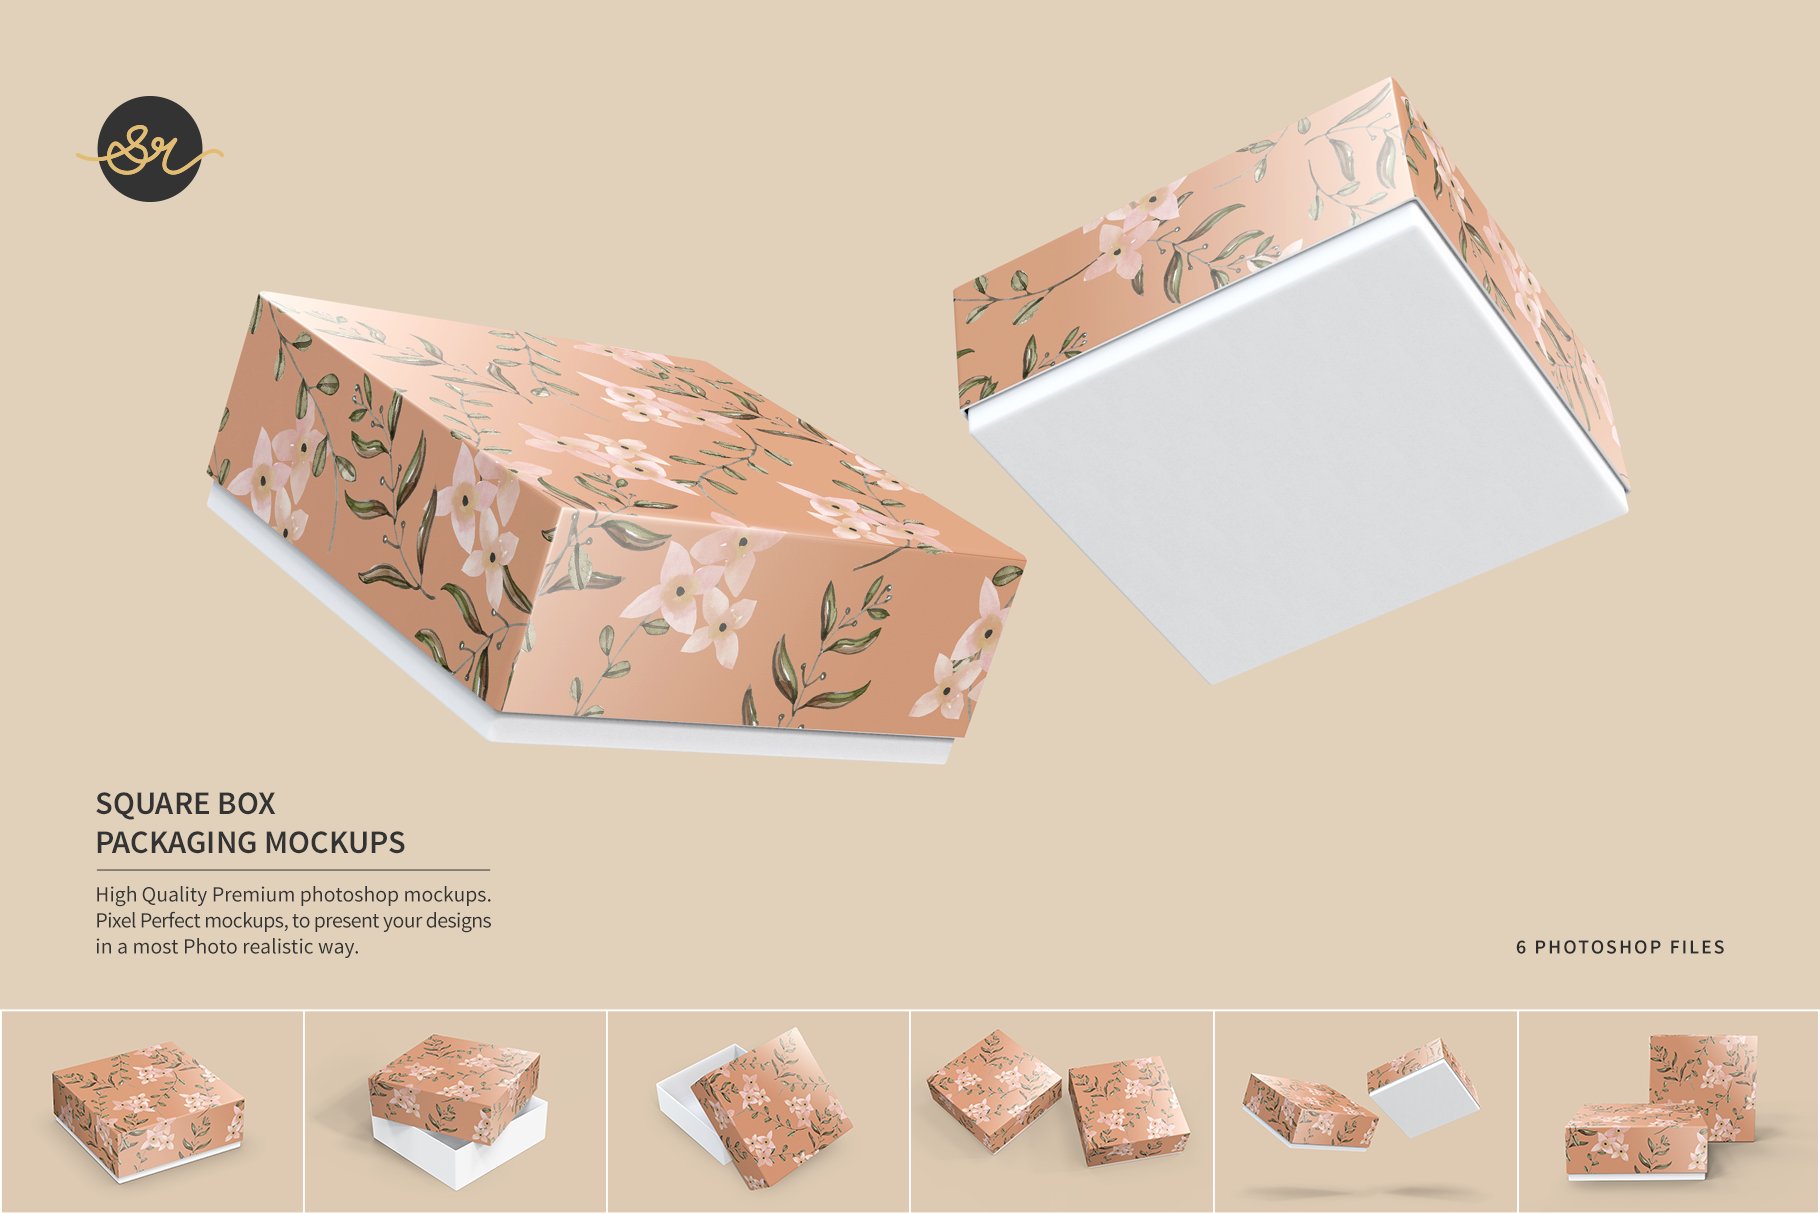 Square Box Packaging Mockups cover image.